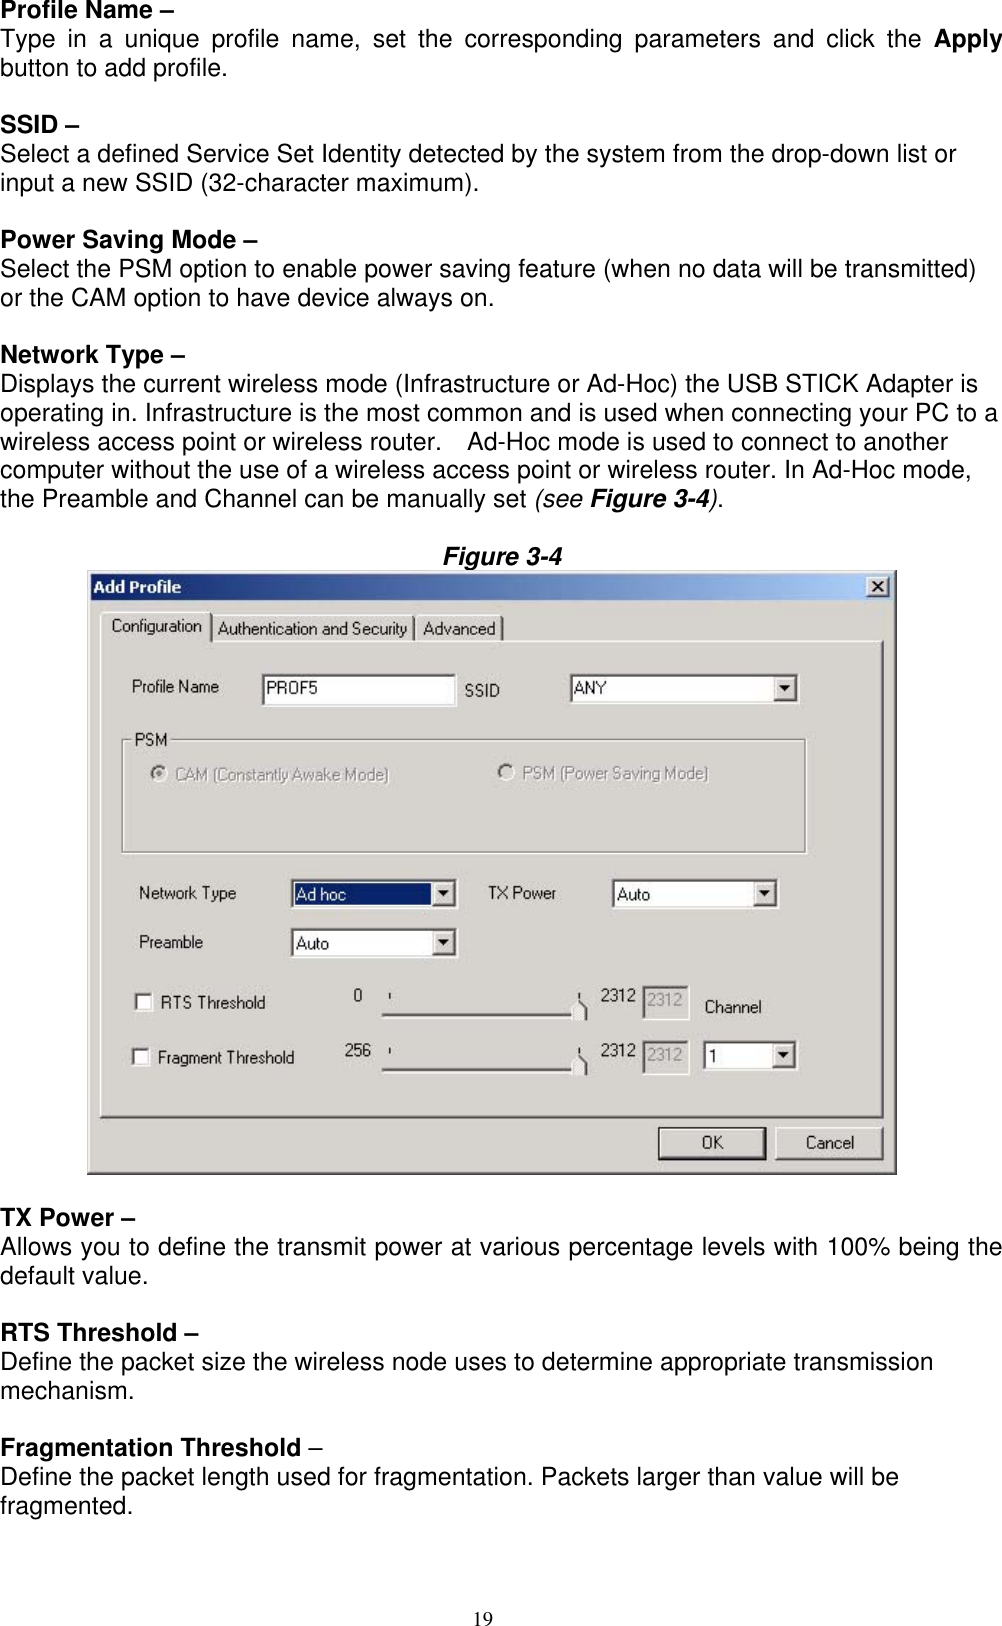 19  Profile Name –   Type in a unique profile name, set the corresponding parameters and click the Apply button to add profile.  SSID – Select a defined Service Set Identity detected by the system from the drop-down list or input a new SSID (32-character maximum).  Power Saving Mode –   Select the PSM option to enable power saving feature (when no data will be transmitted) or the CAM option to have device always on.  Network Type – Displays the current wireless mode (Infrastructure or Ad-Hoc) the USB STICK Adapter is operating in. Infrastructure is the most common and is used when connecting your PC to a wireless access point or wireless router.    Ad-Hoc mode is used to connect to another computer without the use of a wireless access point or wireless router. In Ad-Hoc mode, the Preamble and Channel can be manually set (see Figure 3-4).  Figure 3-4           TX Power – Allows you to define the transmit power at various percentage levels with 100% being the default value.  RTS Threshold –   Define the packet size the wireless node uses to determine appropriate transmission mechanism.  Fragmentation Threshold – Define the packet length used for fragmentation. Packets larger than value will be fragmented.  